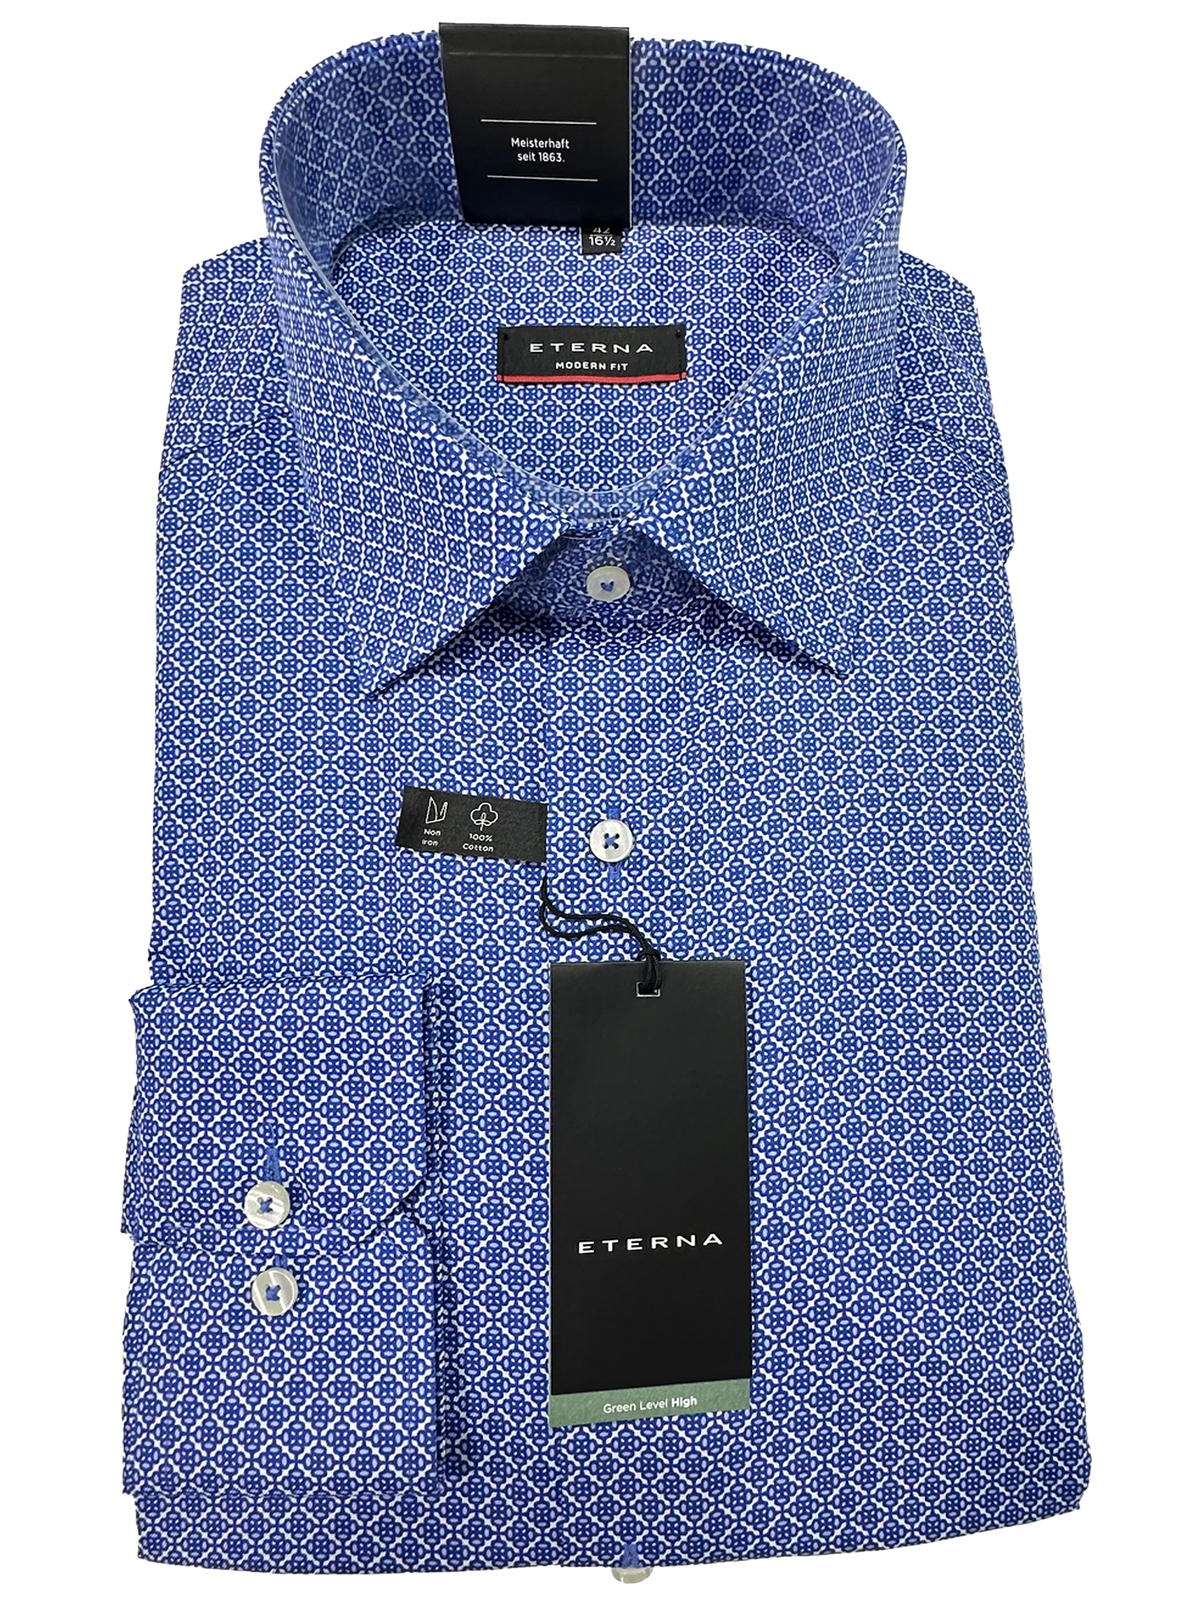 Harrys Collection Menswear – for Page – 2 Shirts Eterna